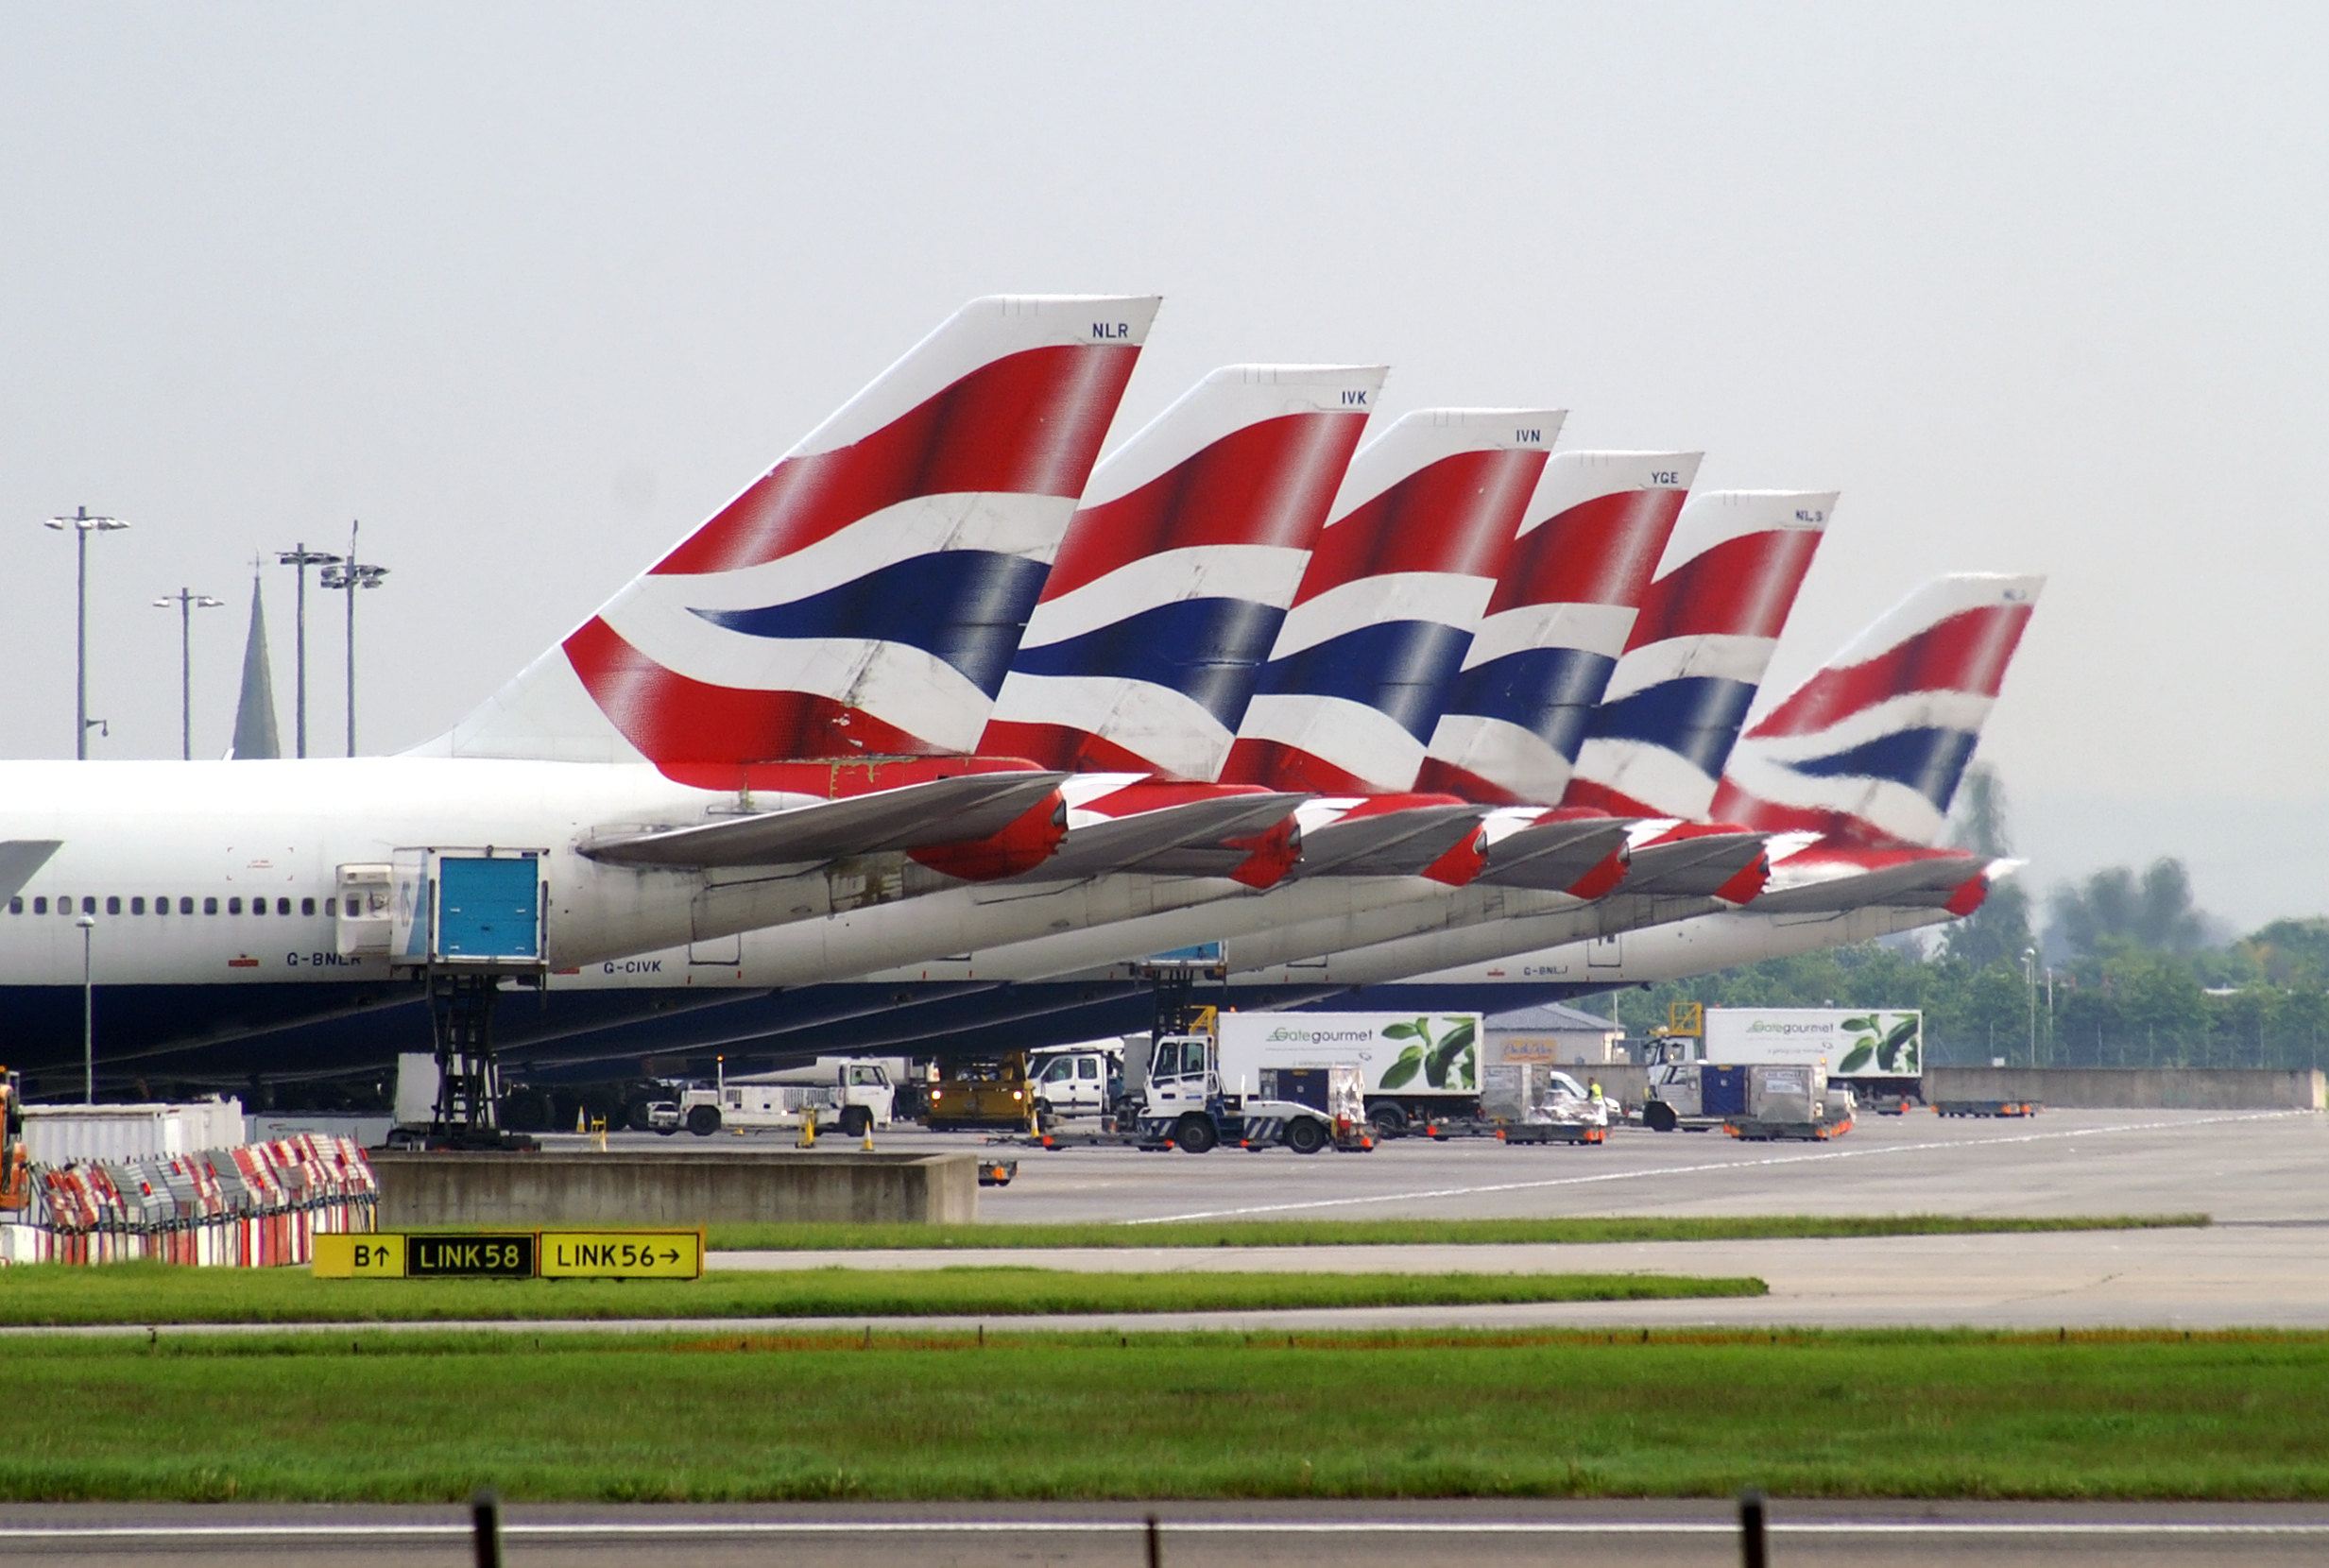 The tail end of a small selection of British airways fleet. All of which carry the Union Jack